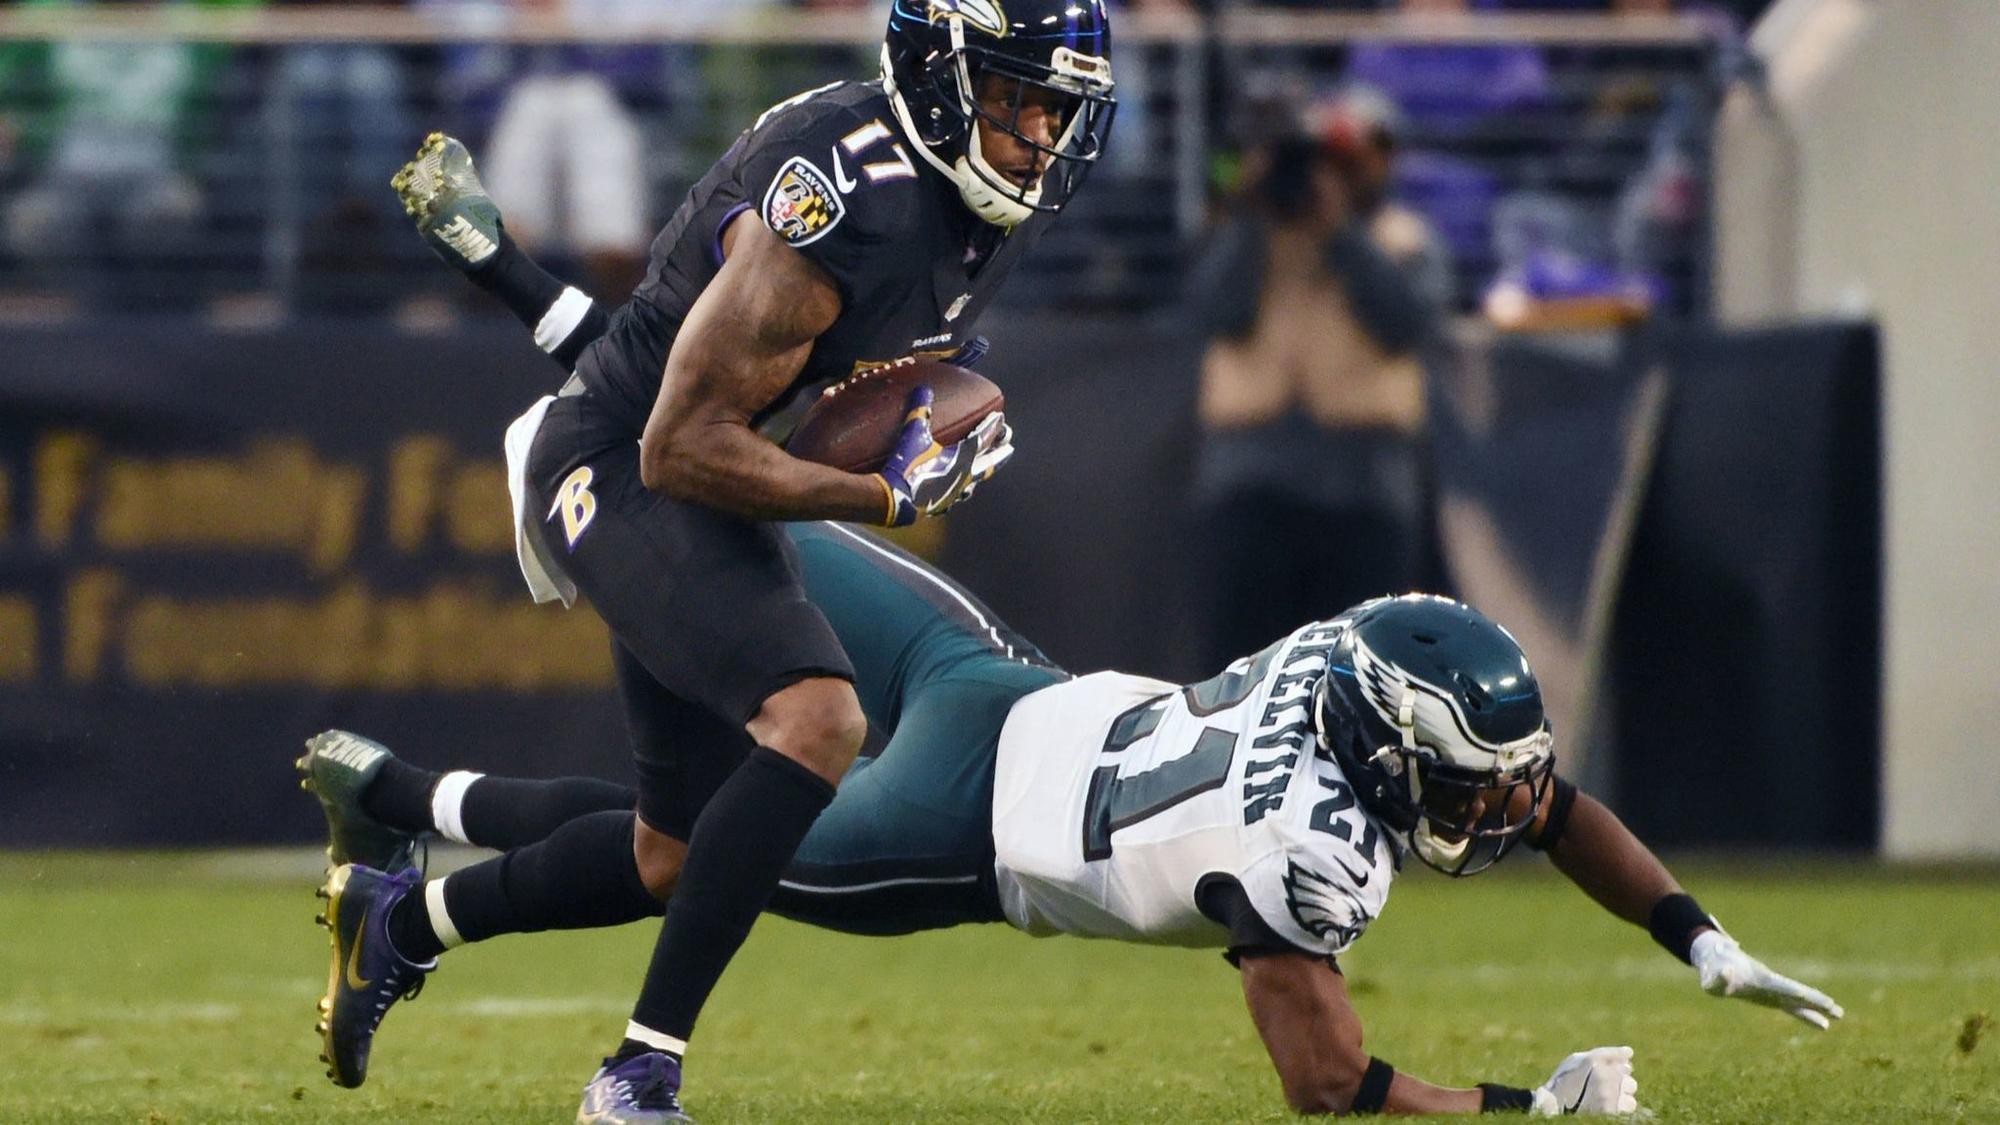 Baltimore-to-Philly pipeline continues as Eagles sign WR Mike Wallace to a one-year deal